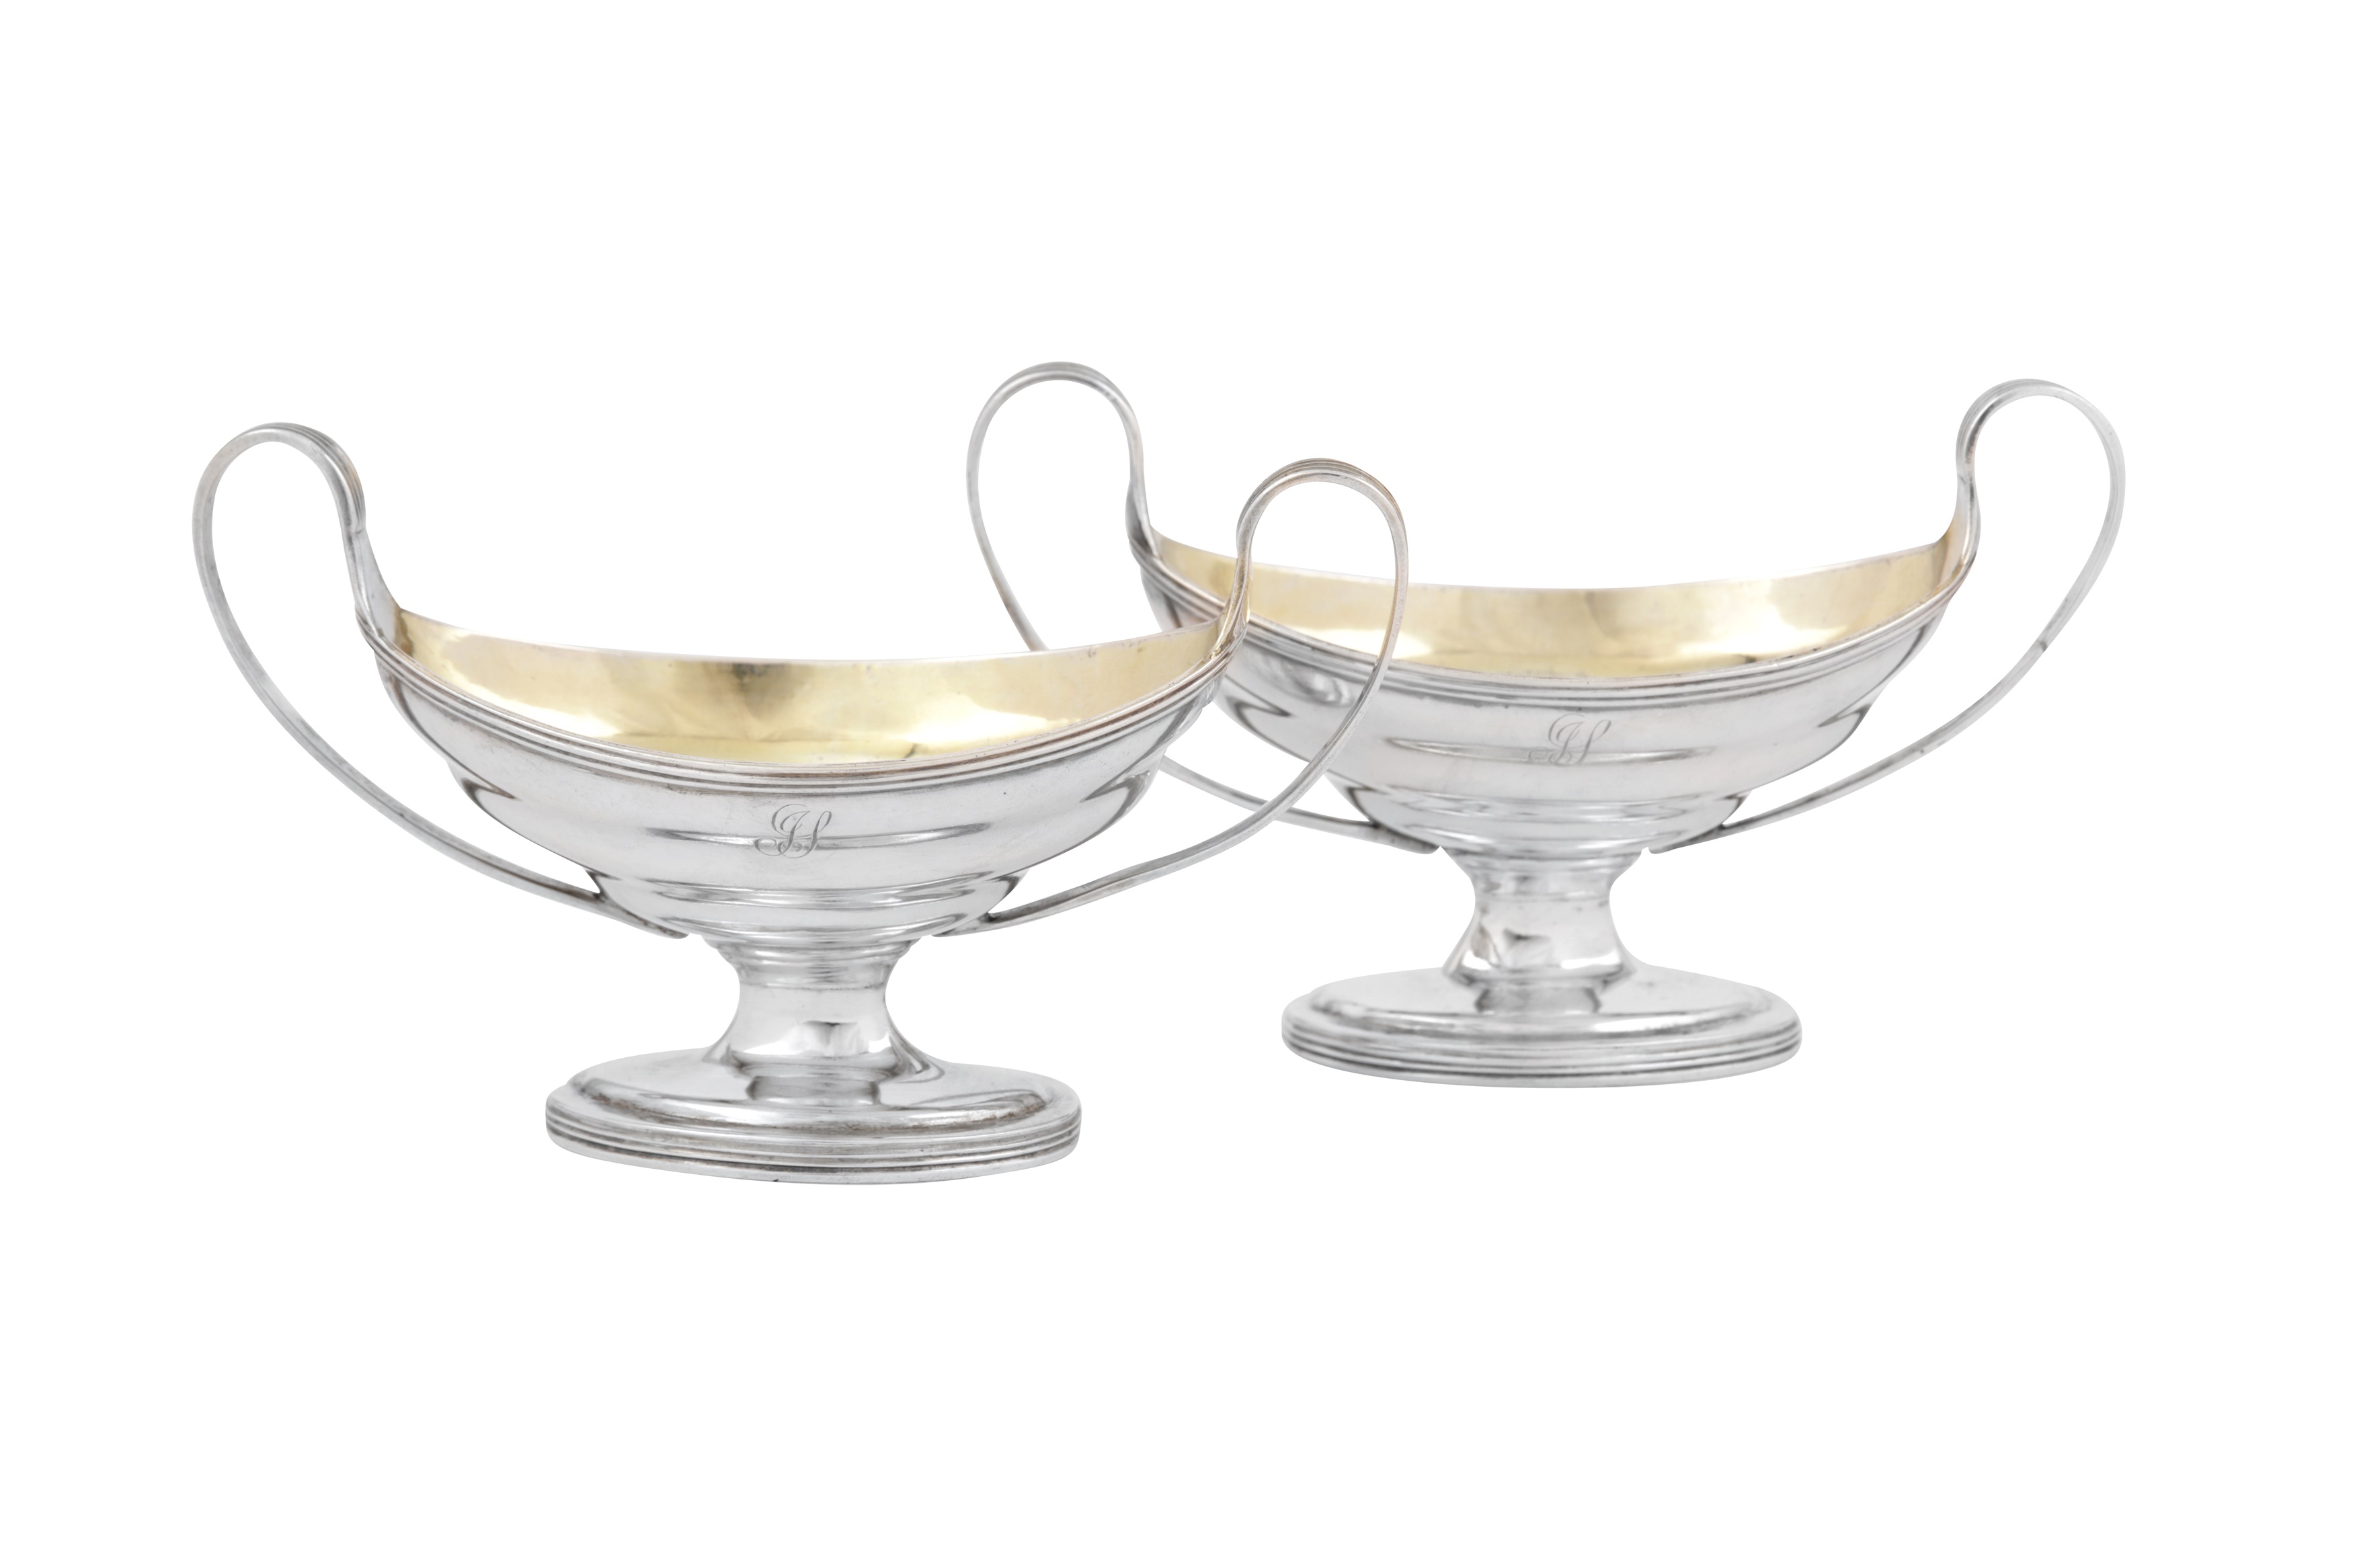 A set of four George III sterling silver salts, London 1804 by William Abdy II - Image 2 of 10